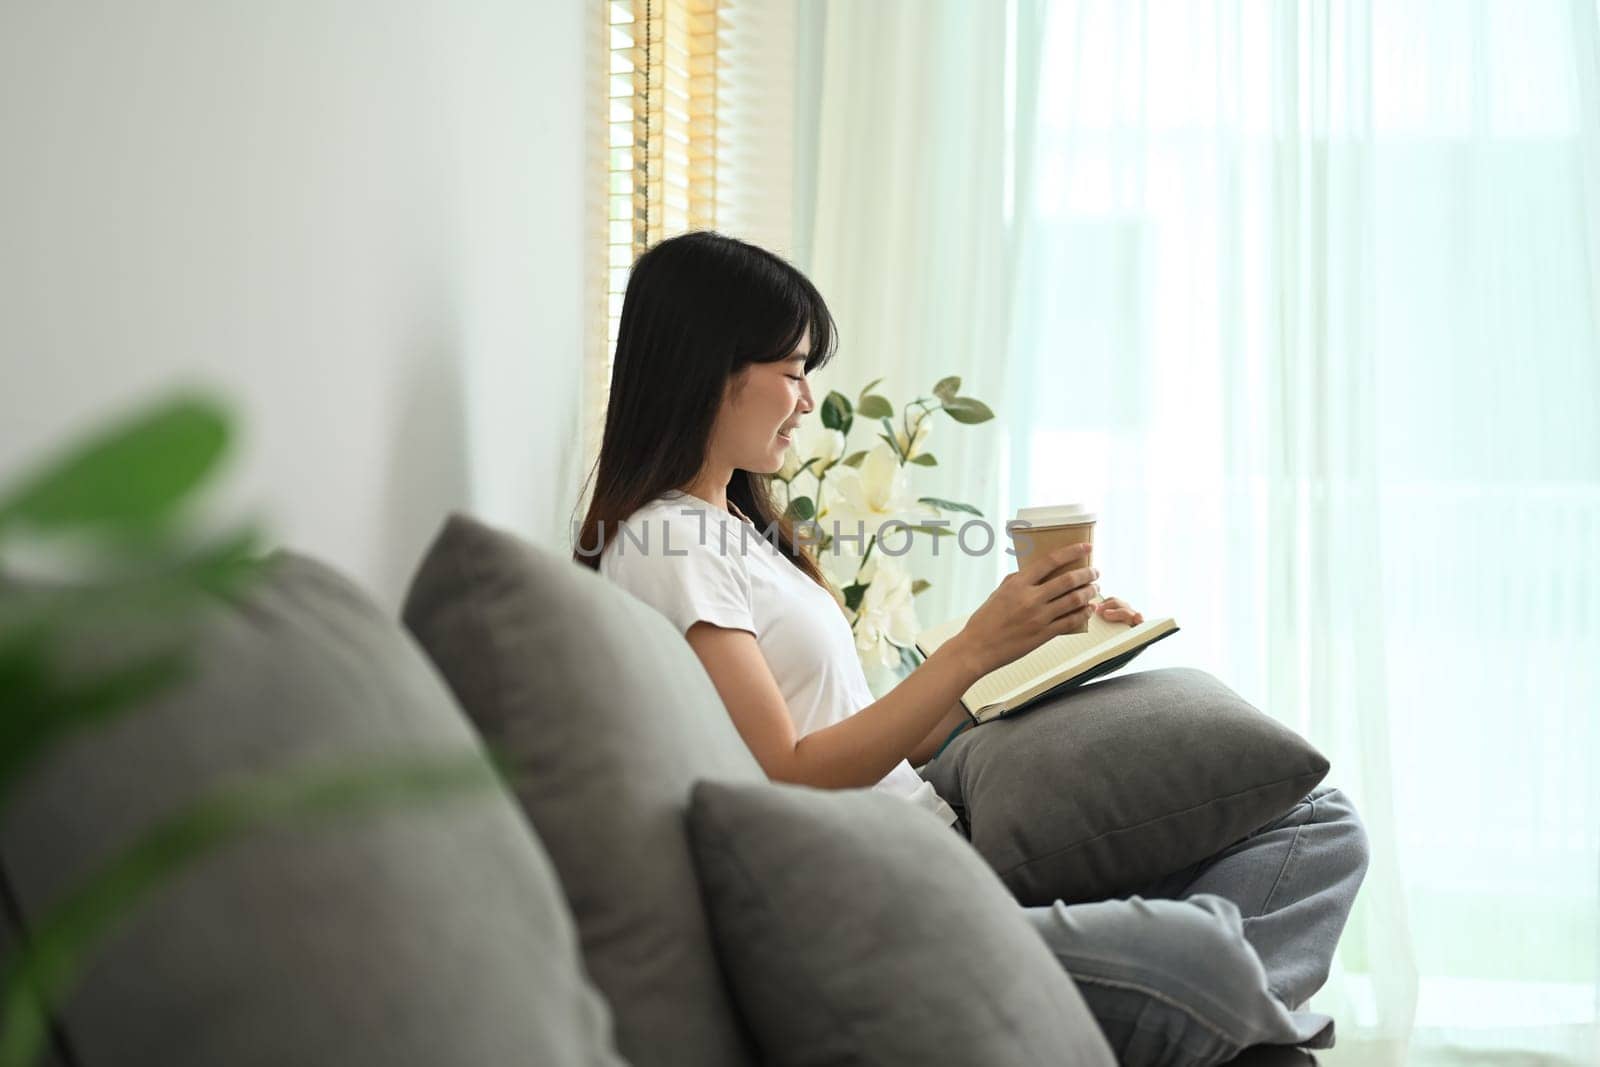 Peaceful young woman with paper cup of coffee reading book on couch at home.